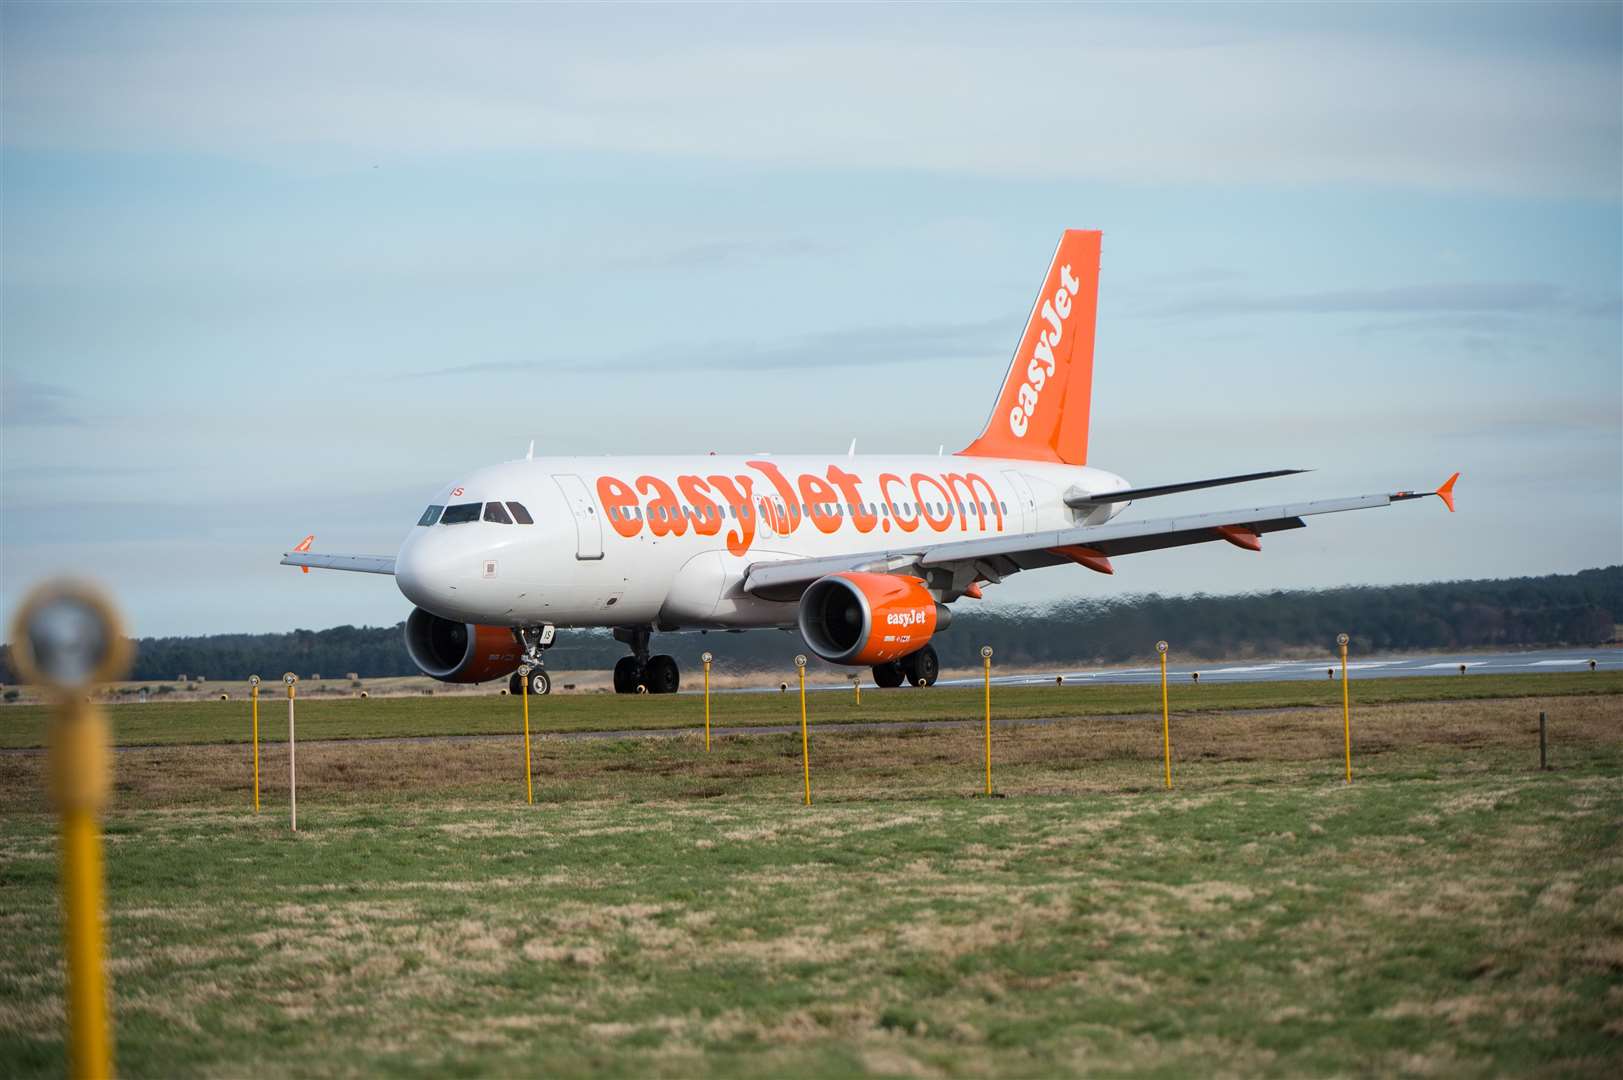 EasyJet has announced it will double its daily summer frequency to London Gatwick and has confirmed its Manchester route will continue to operate on a seasonal basis.